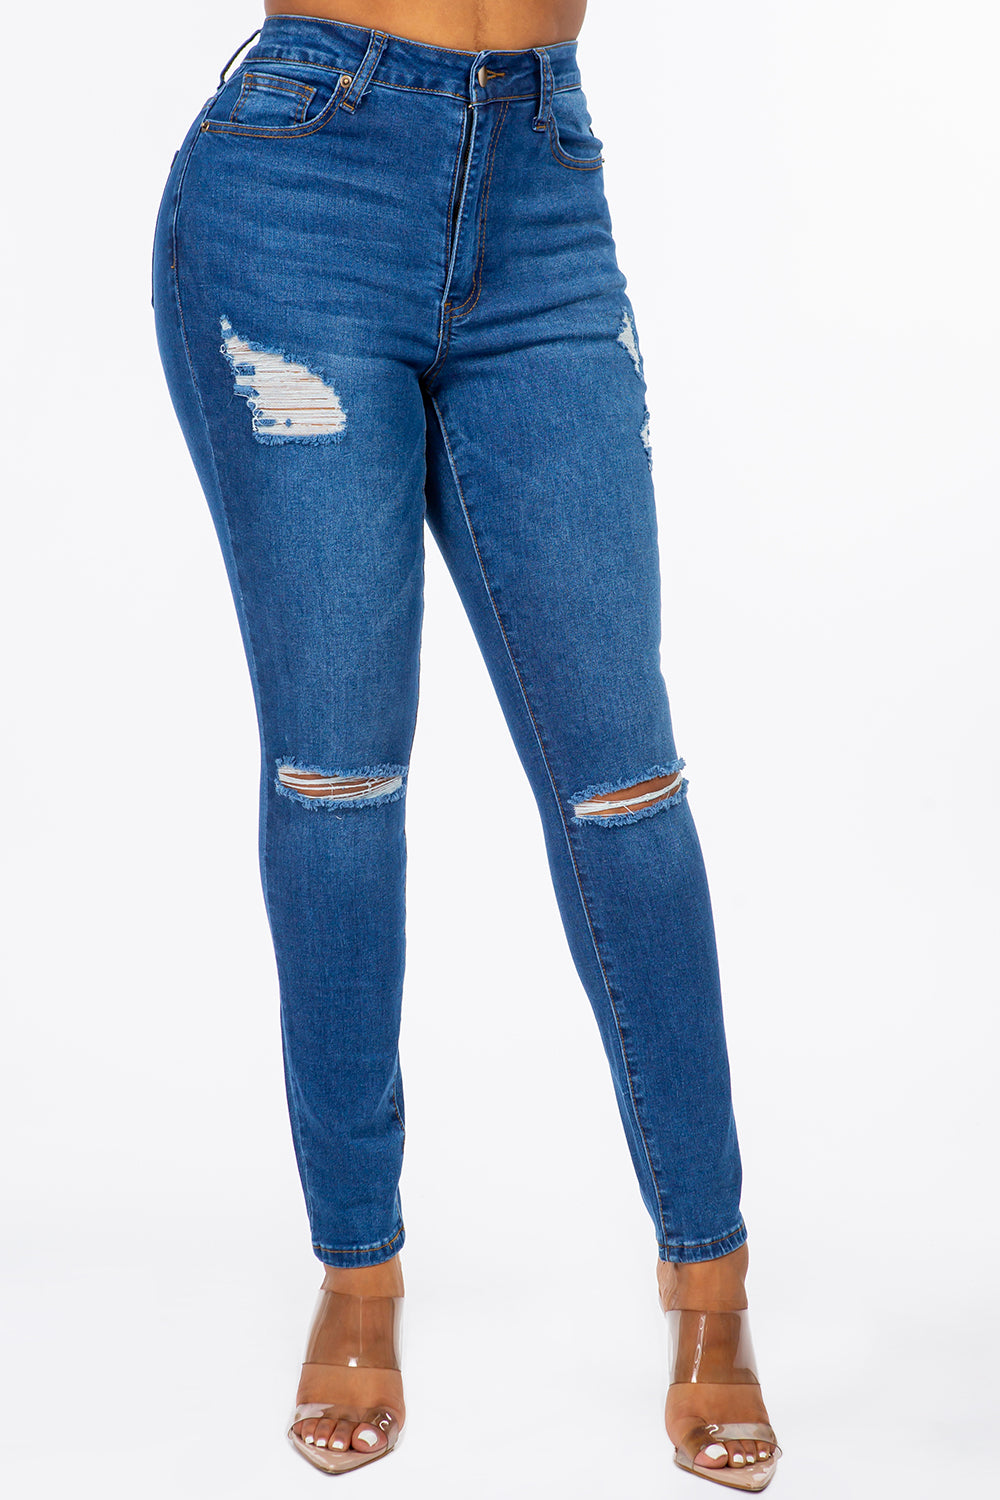 Extreme Stretch Distressed High Rise Skinny Jeans Light YH2212